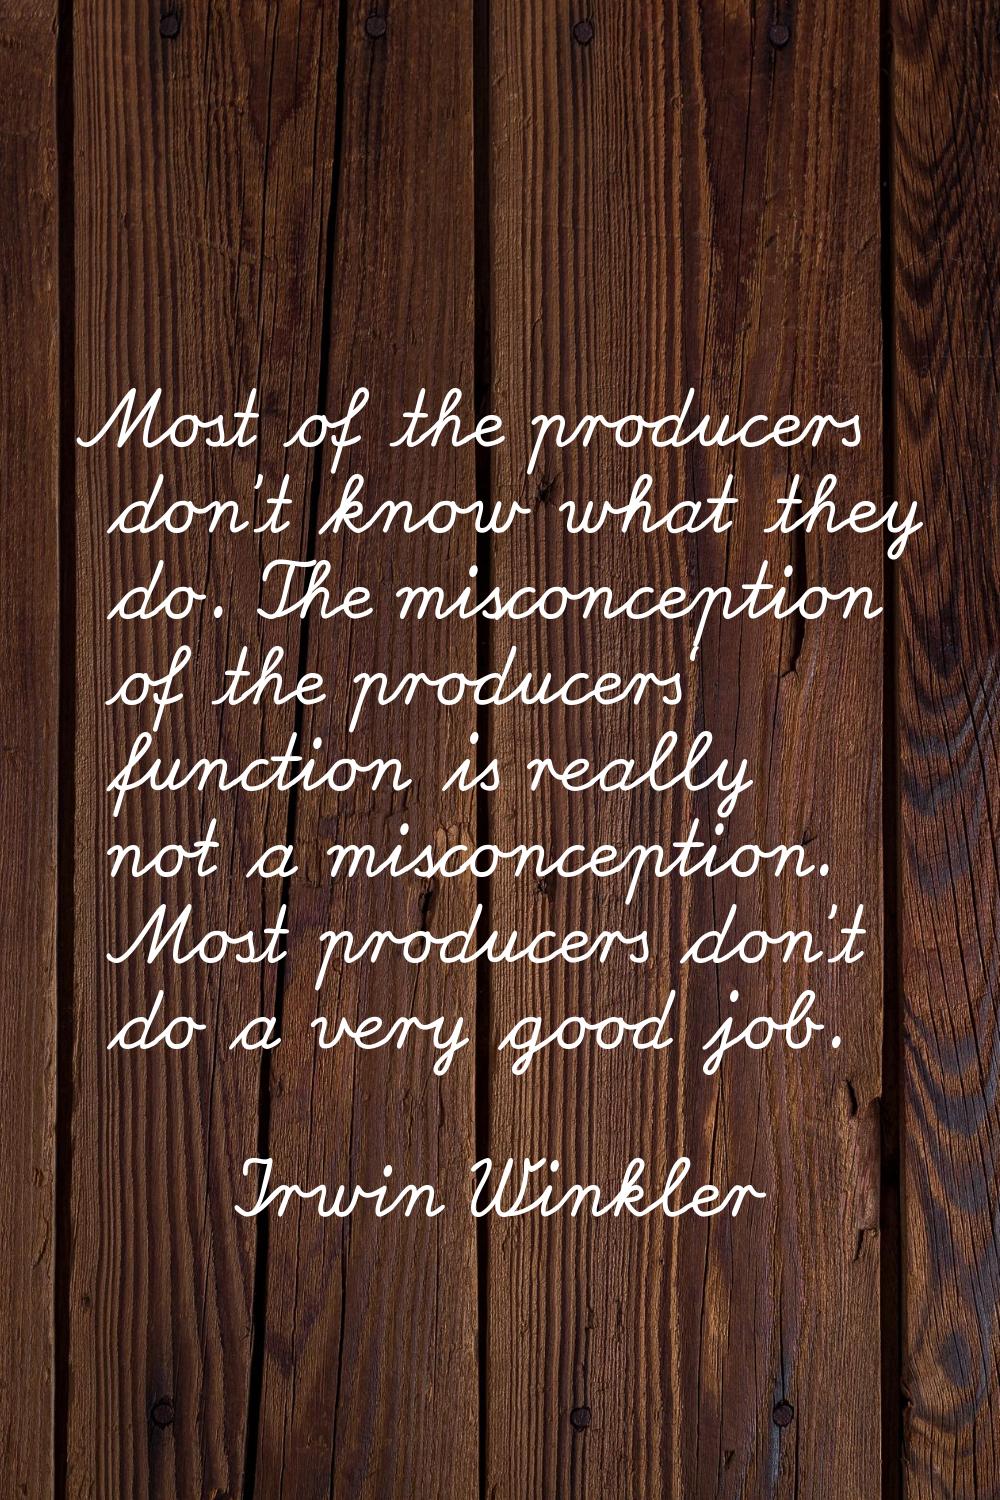 Most of the producers don't know what they do. The misconception of the producers' function is real